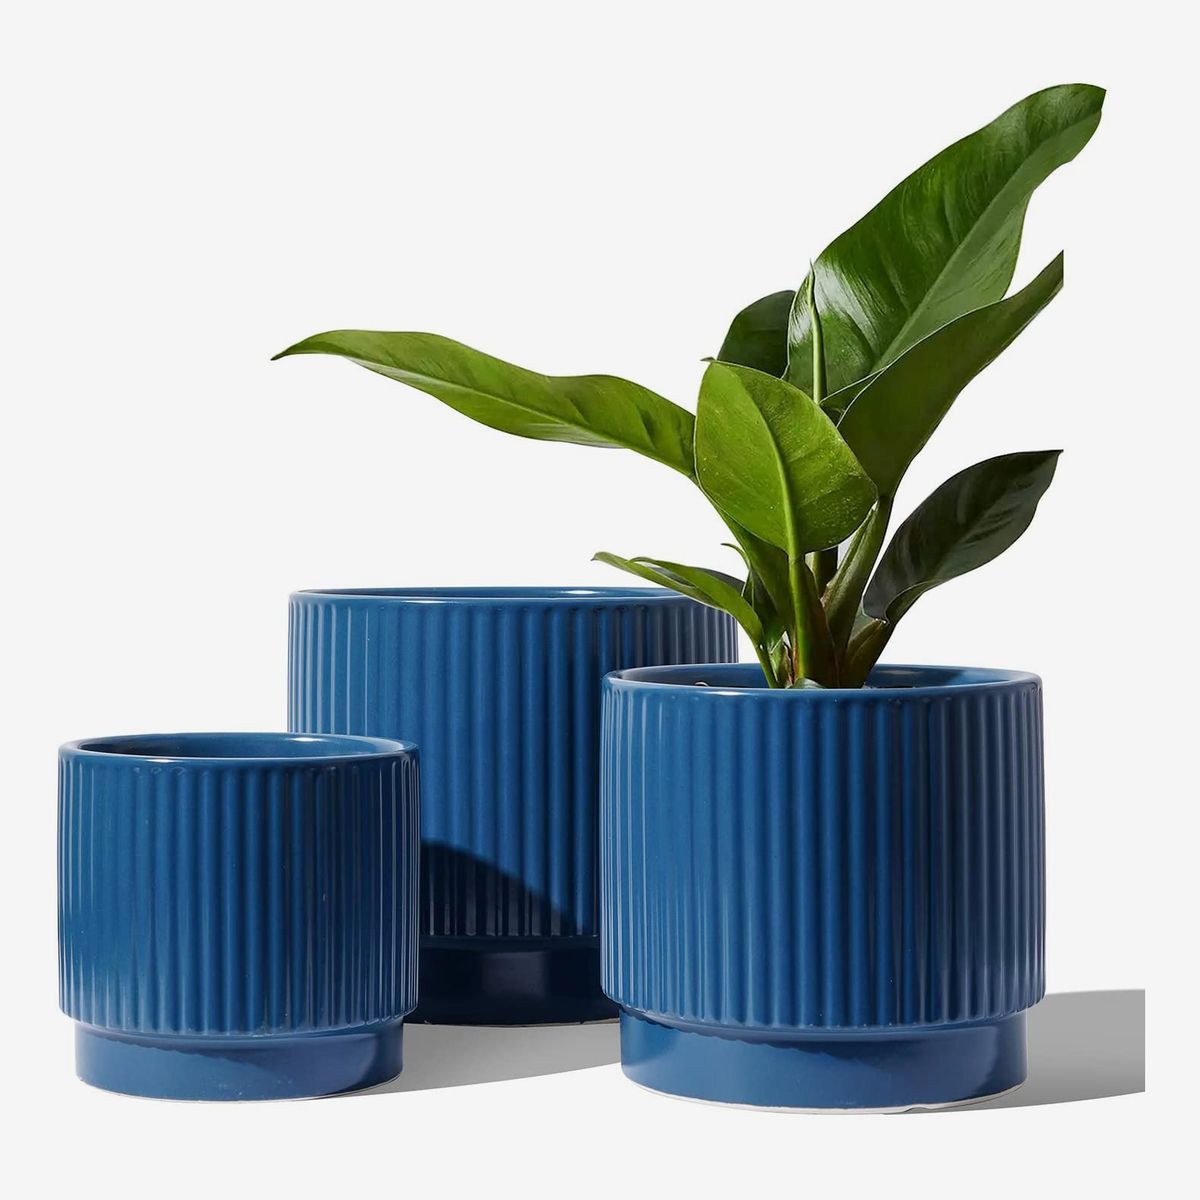 Terracotta Plant Pot with Saucer Hand Painted Blue Mountains Line Art Plant Pot with Drainage Hole Indoor Outdoor Clay Planter